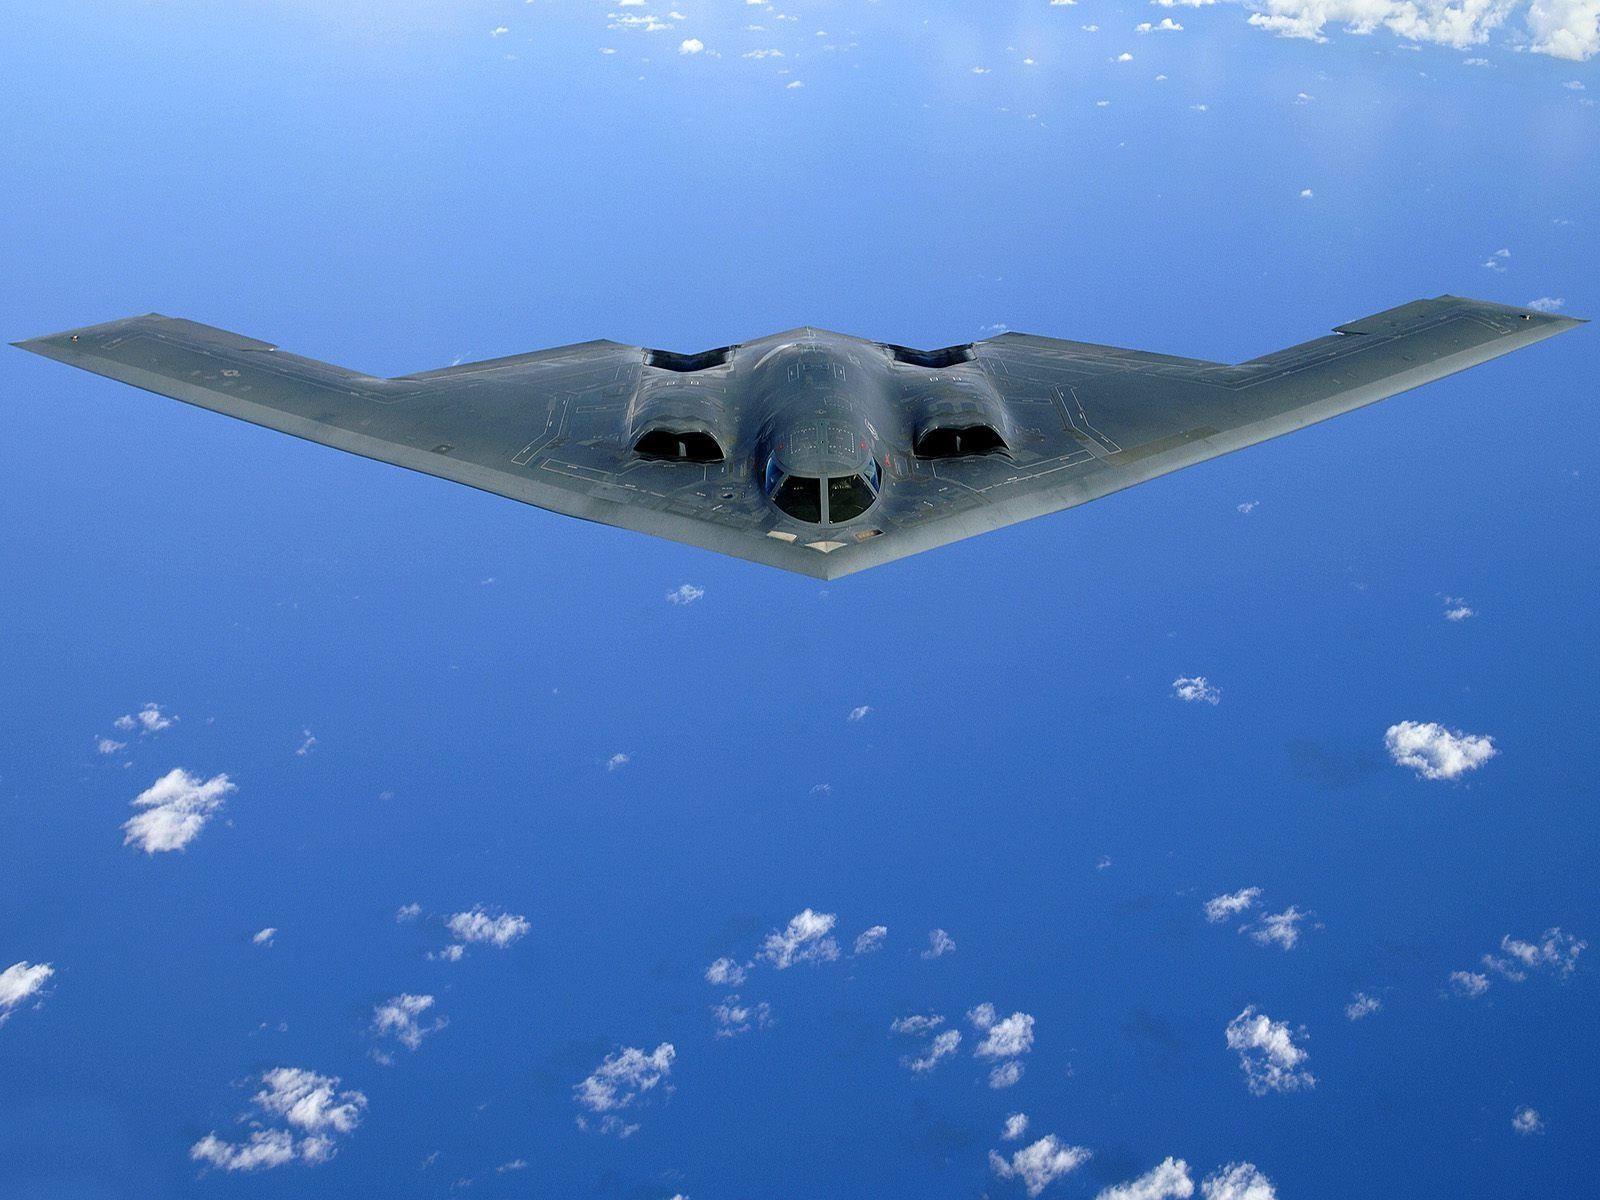 Stealth Bomber B 2 Flying Over Blue Sky Free and Wallpaper